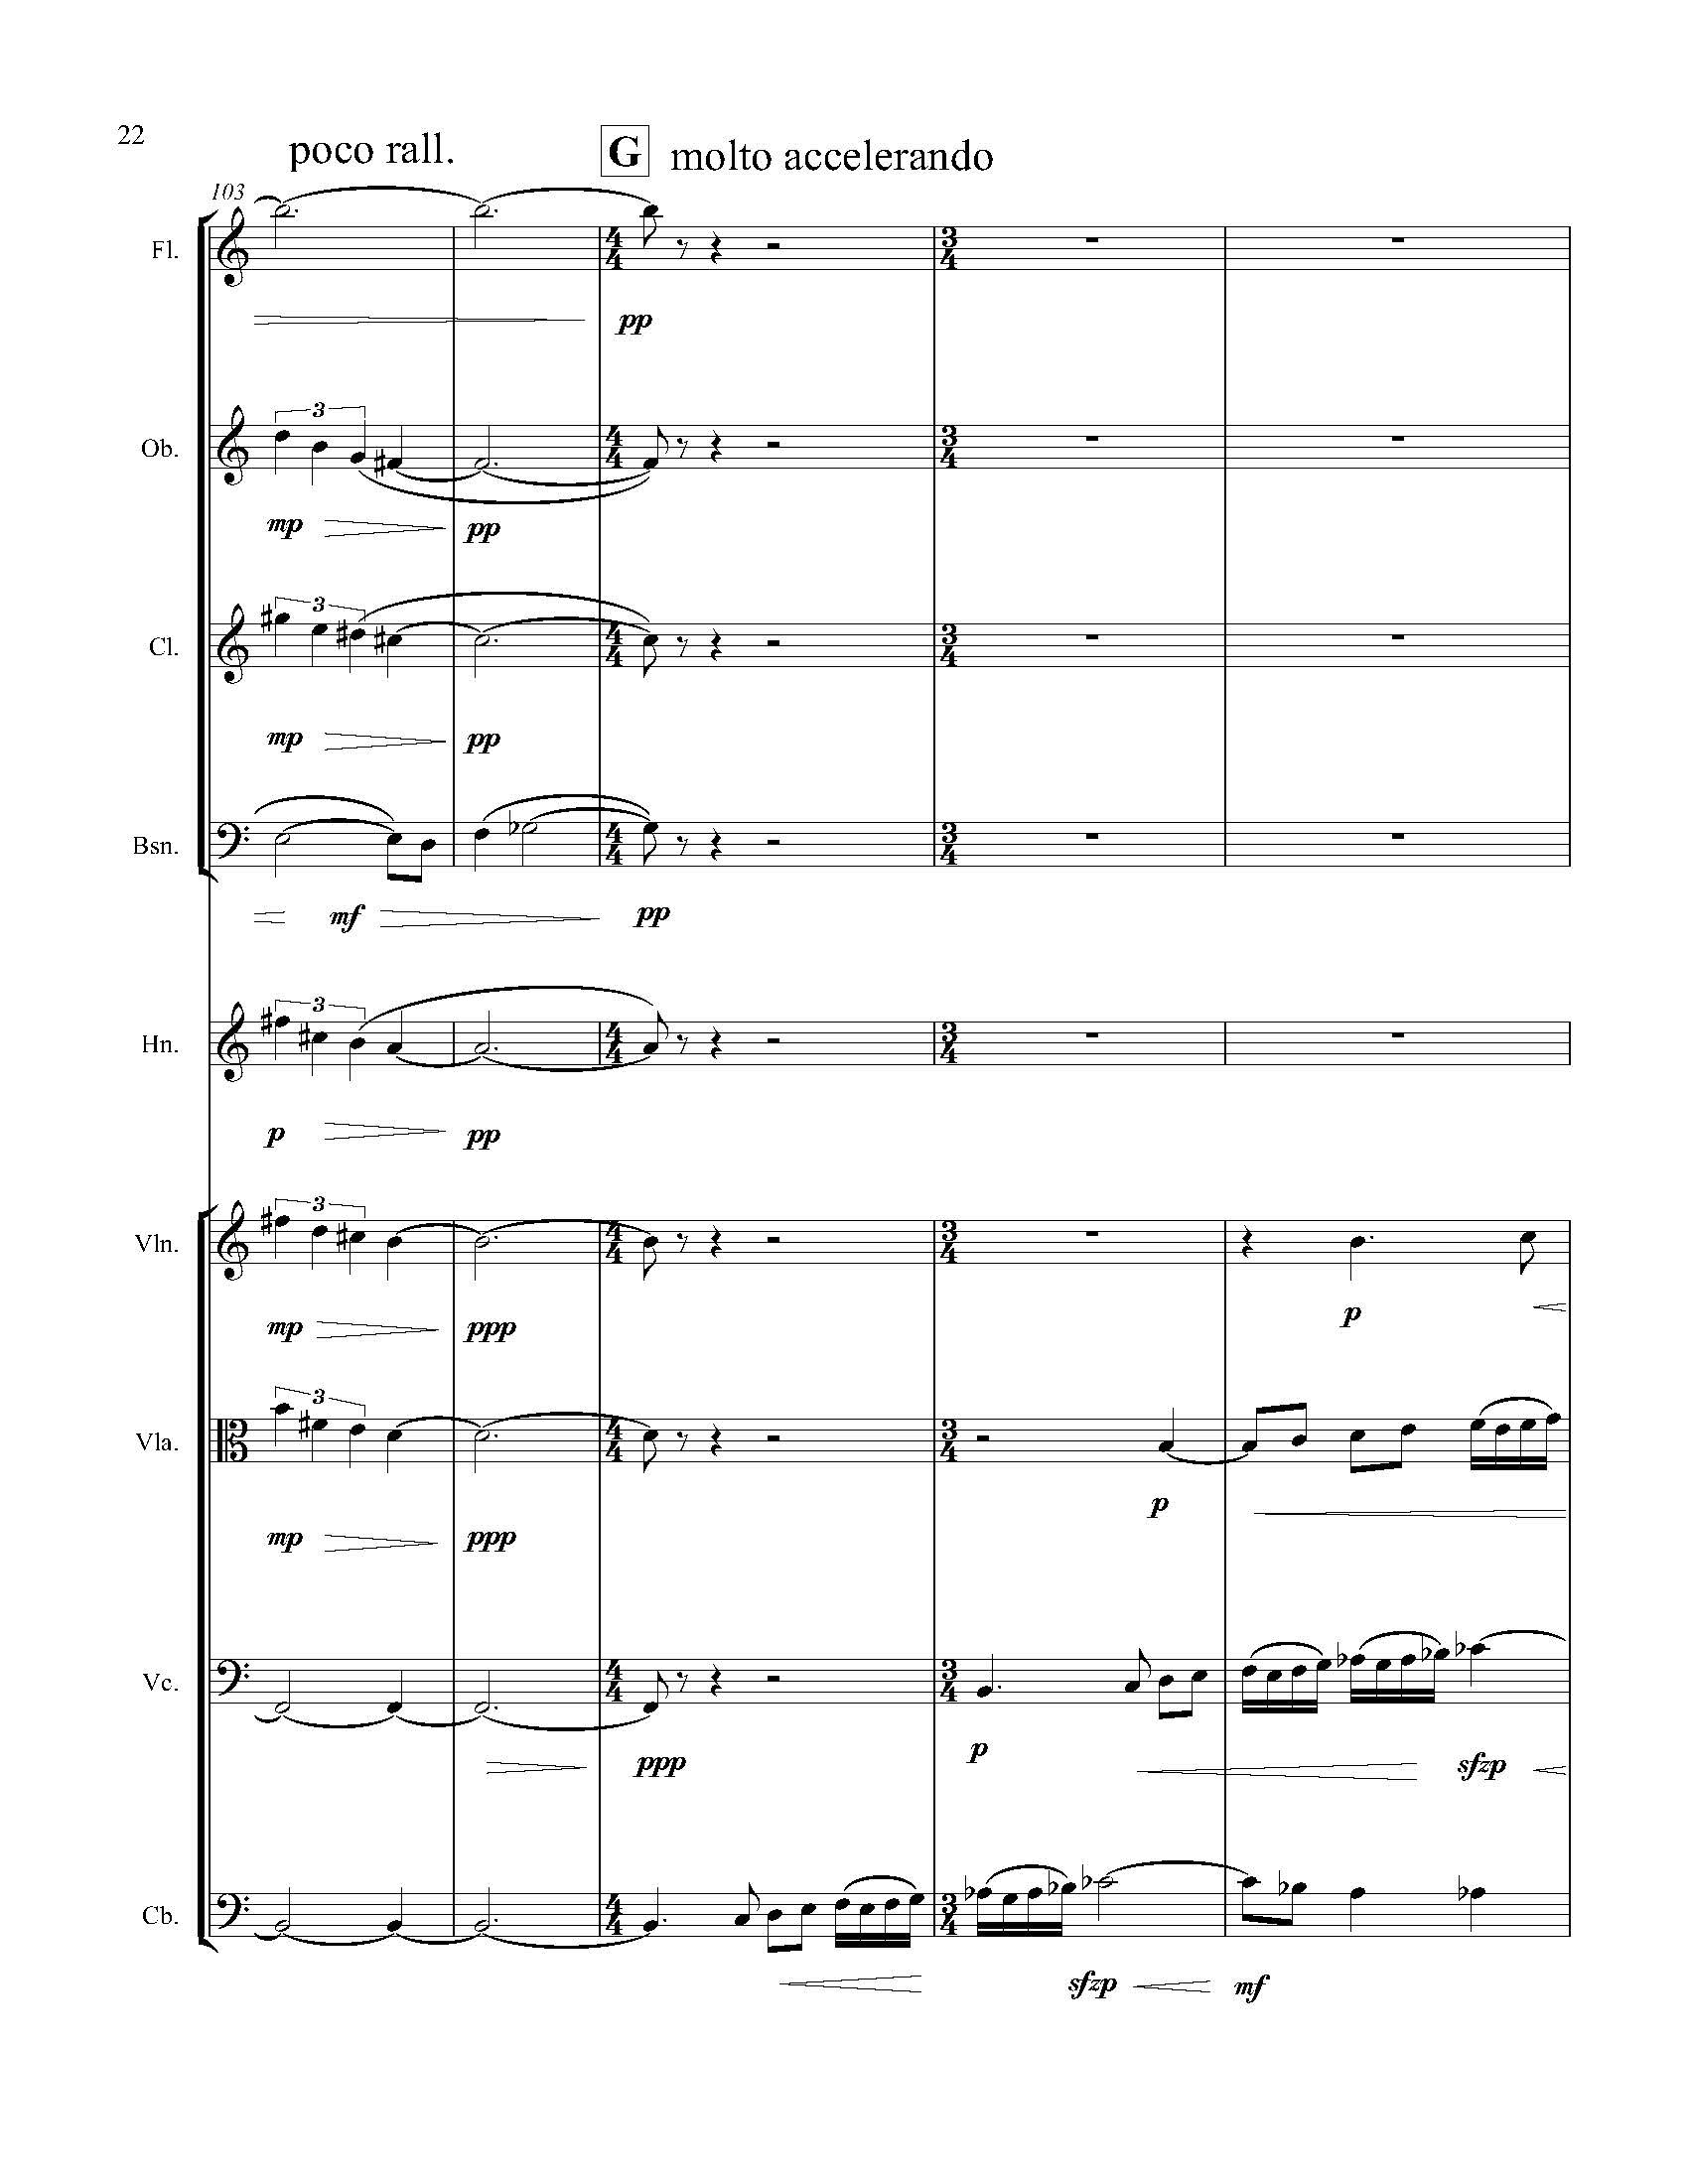 In Search of a Bird - Complete Score_Page_28.jpg